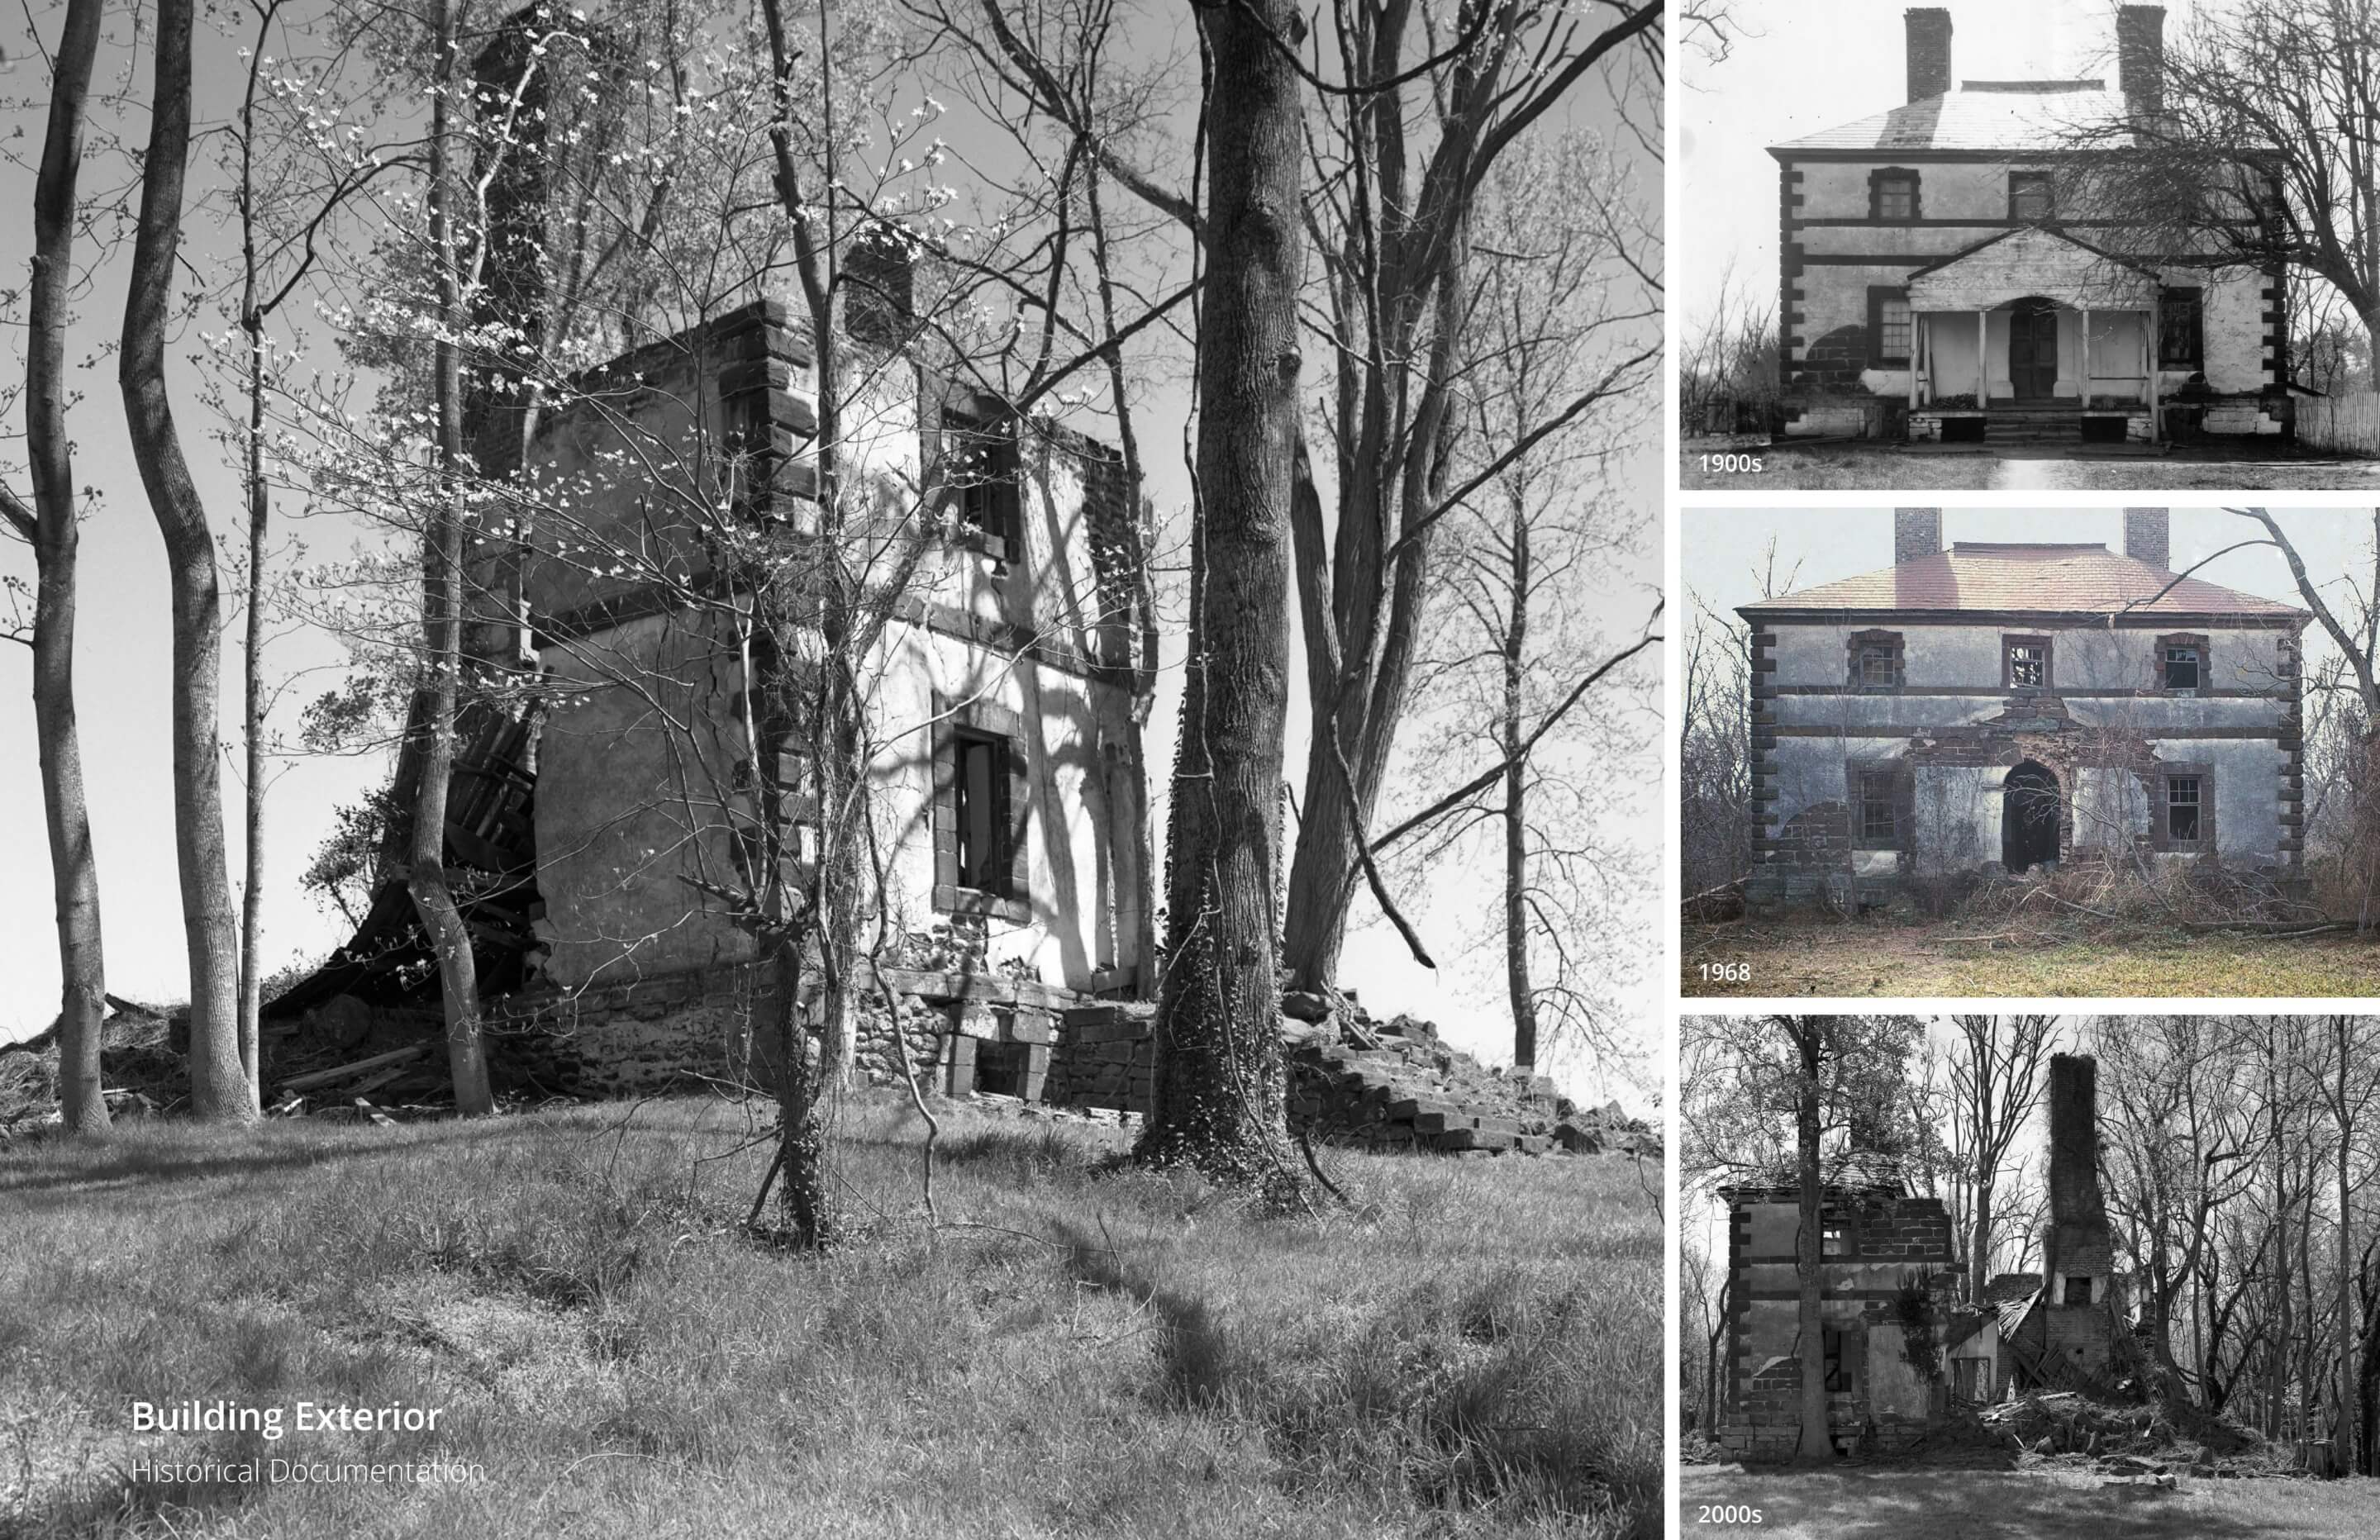 Historical documentation of a two story home through the last 100 years, showing a crumbling building